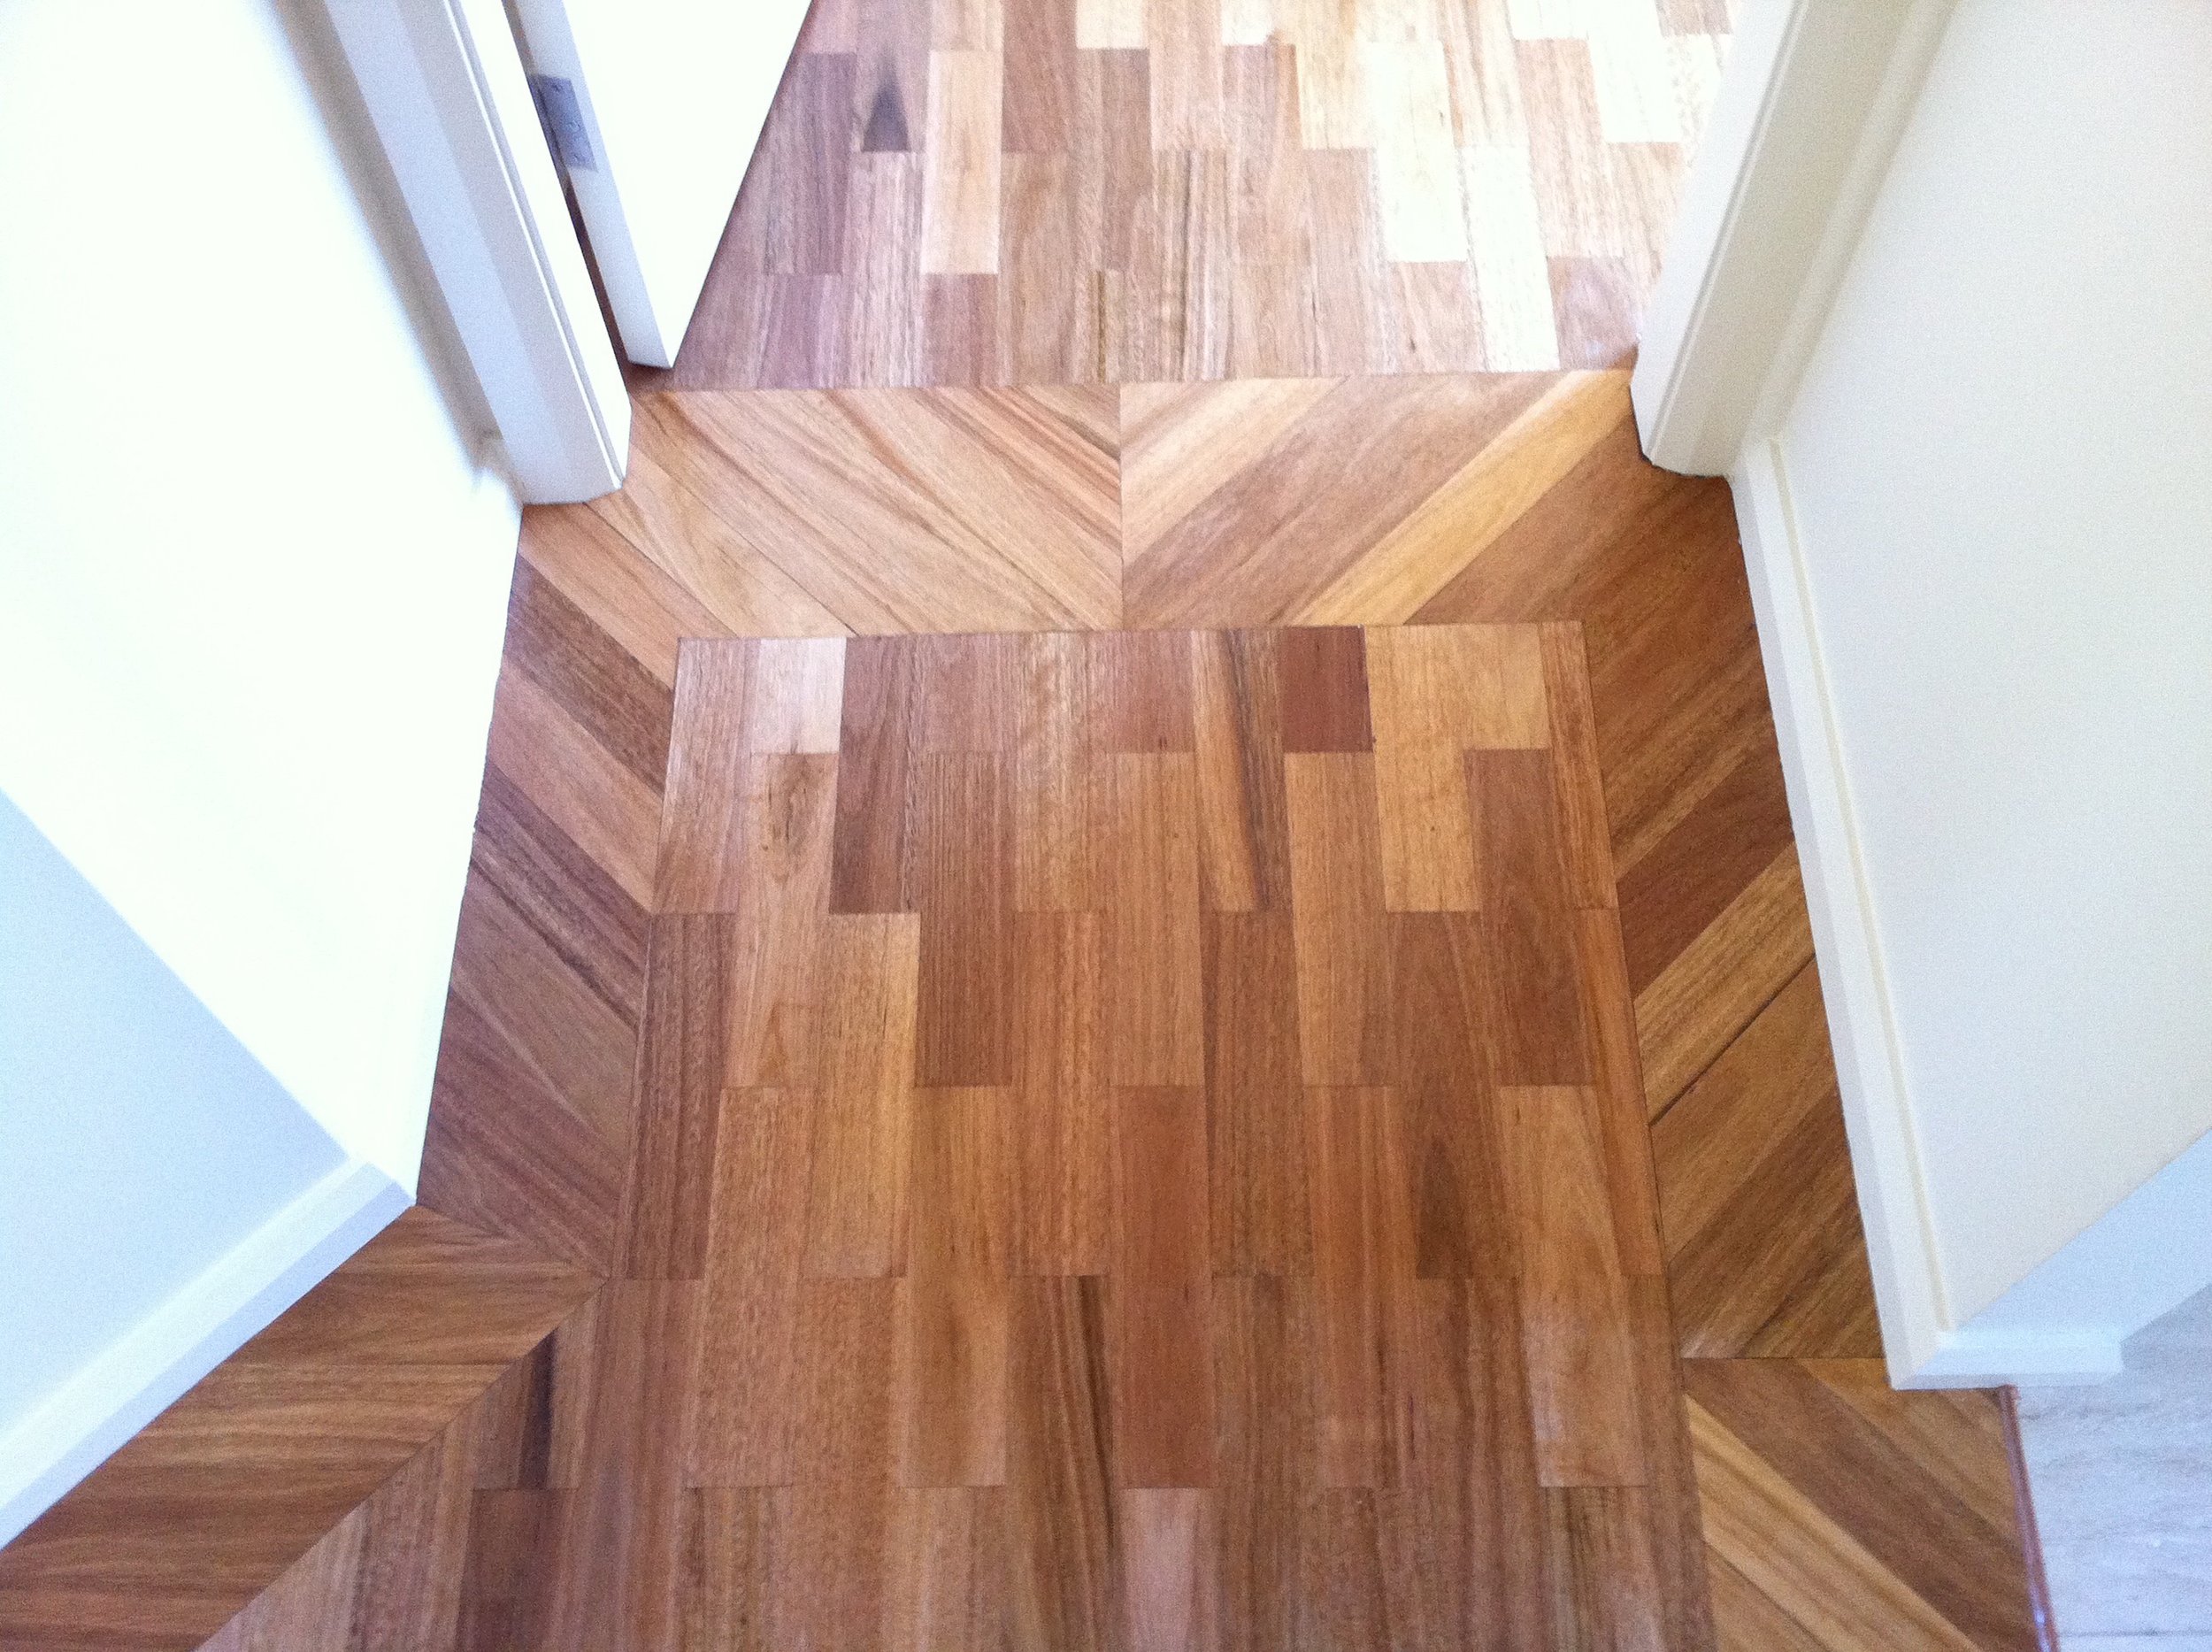  Blackbutt parquet laid in a brickbond pattern with a diagonal solider course border 